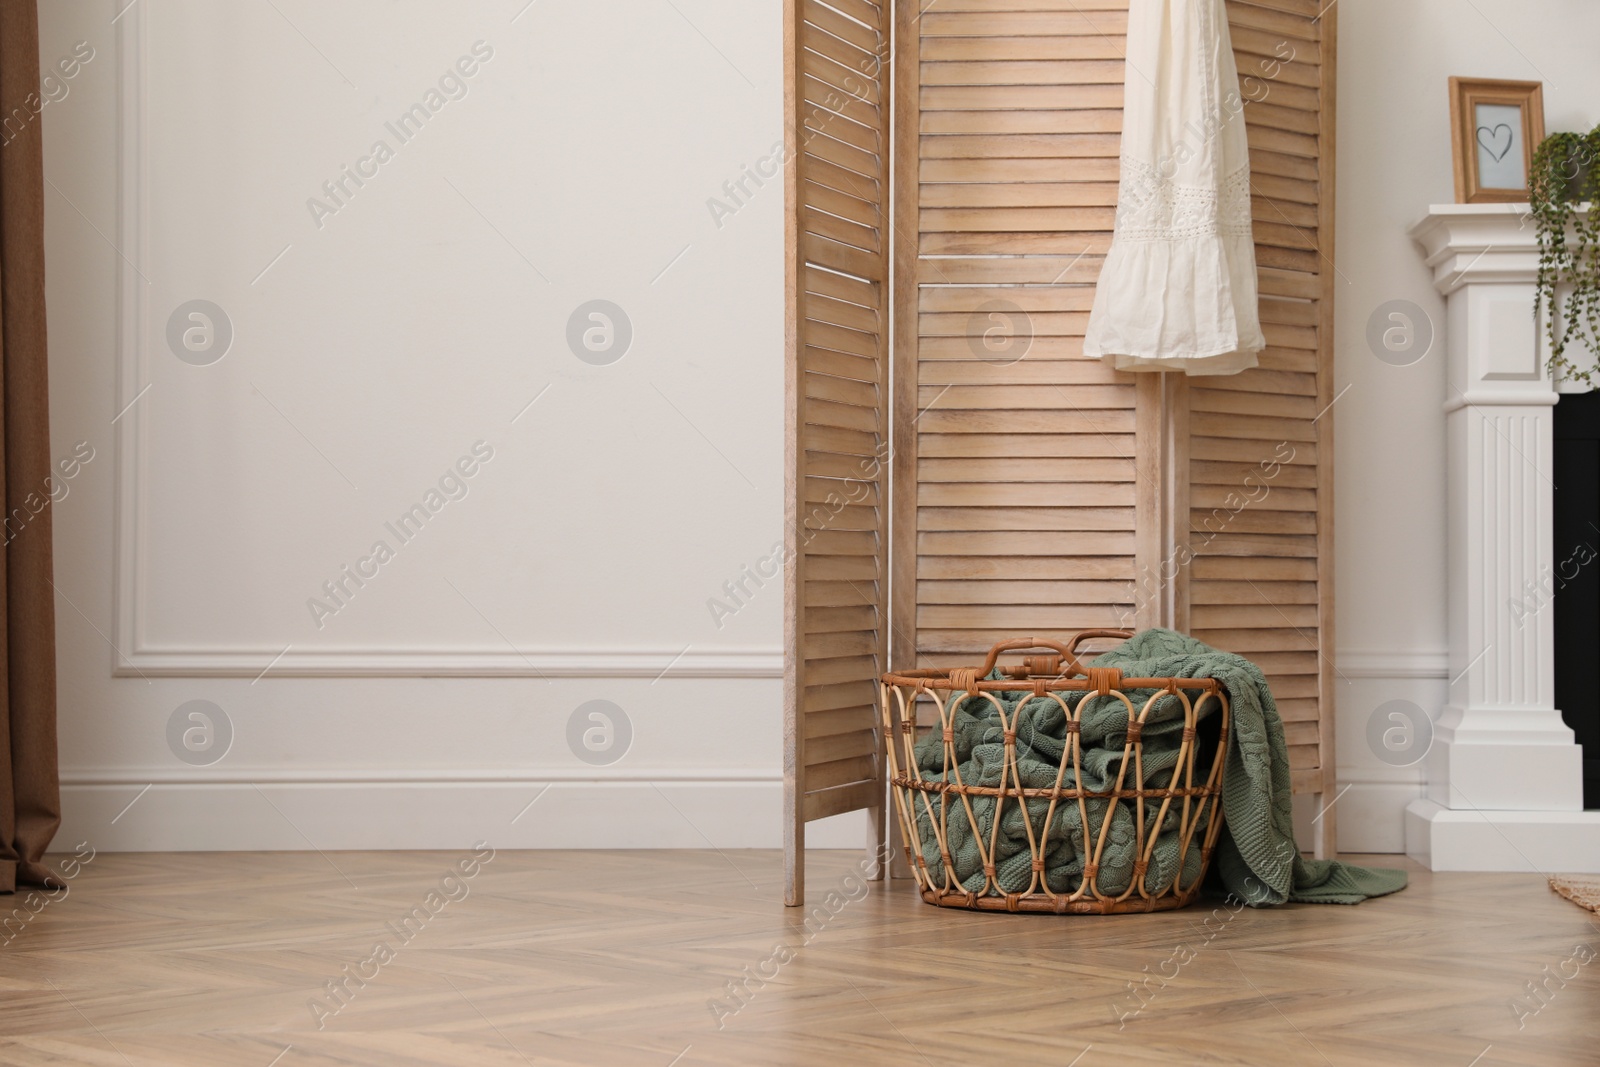 Photo of Wooden folding screen and wicker basket with blanket in room. Interior design